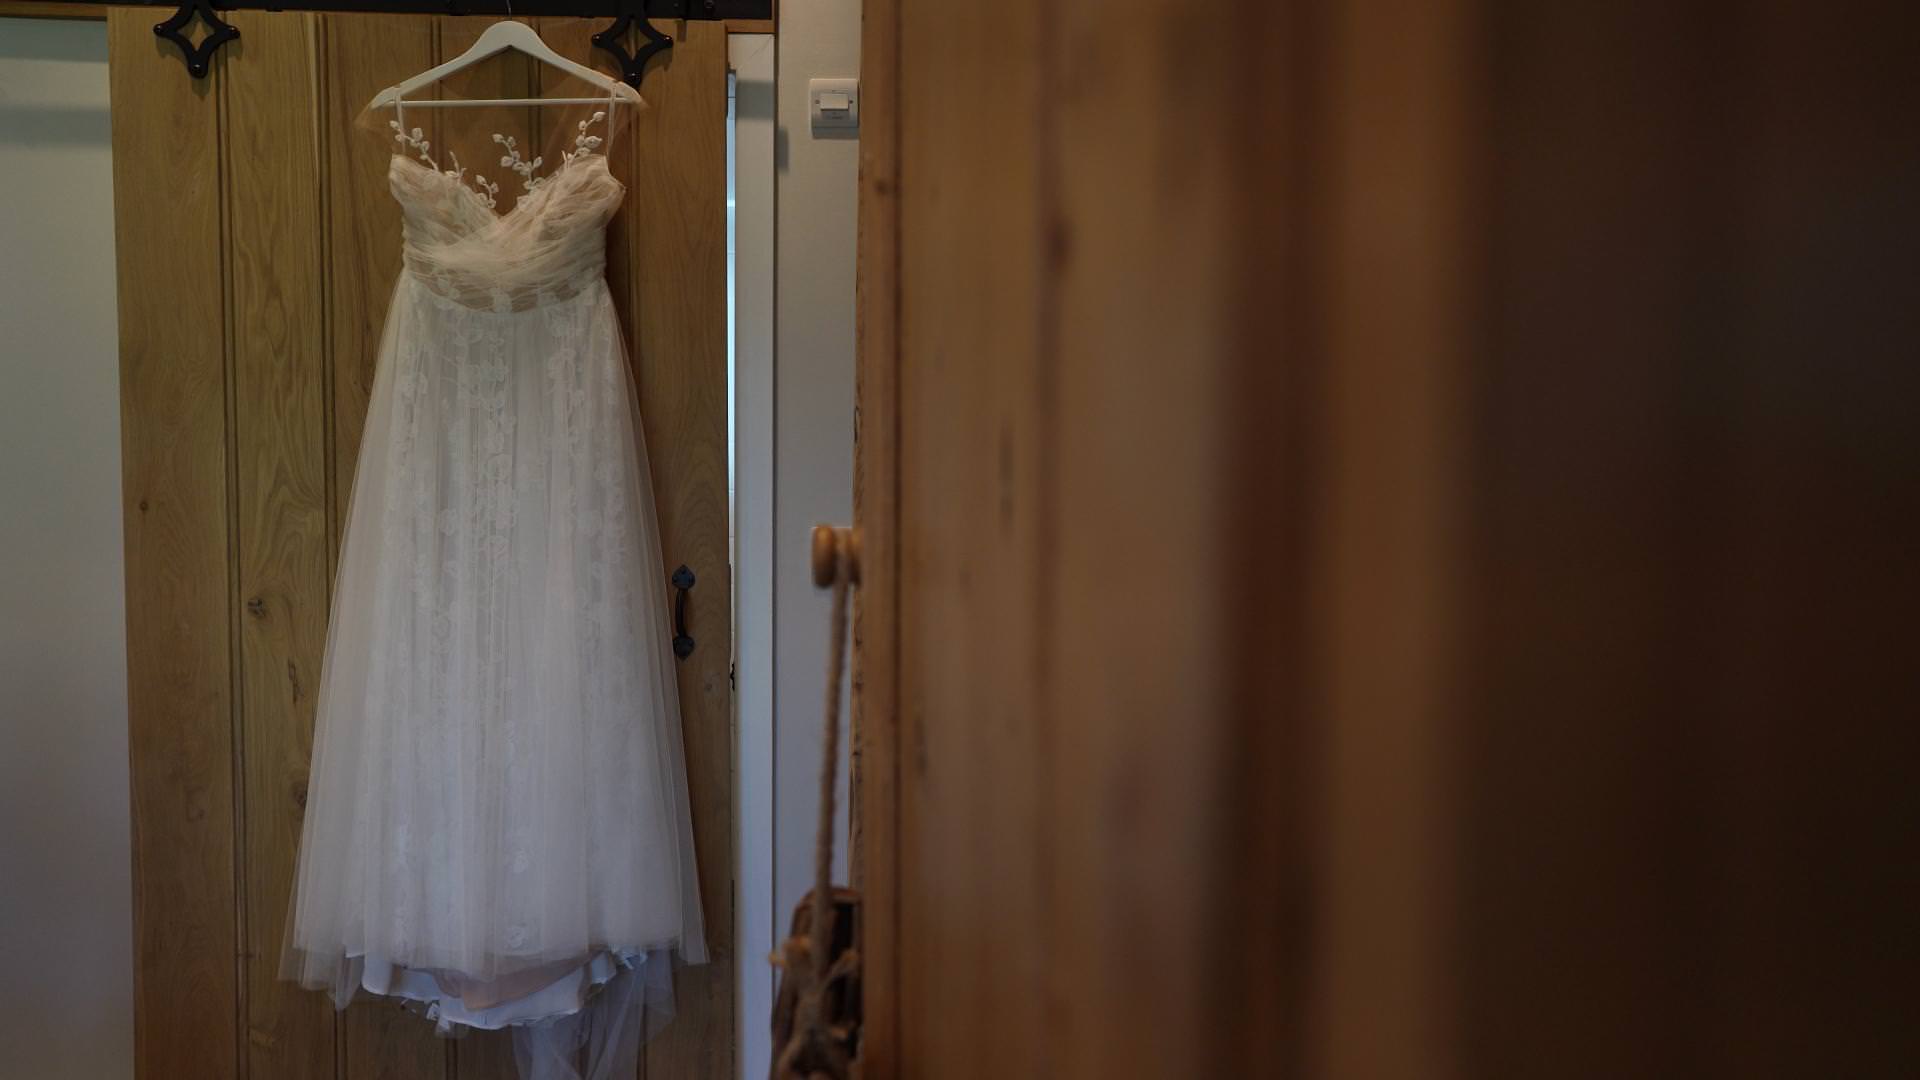 tulle wedding dress hangs ready for bride